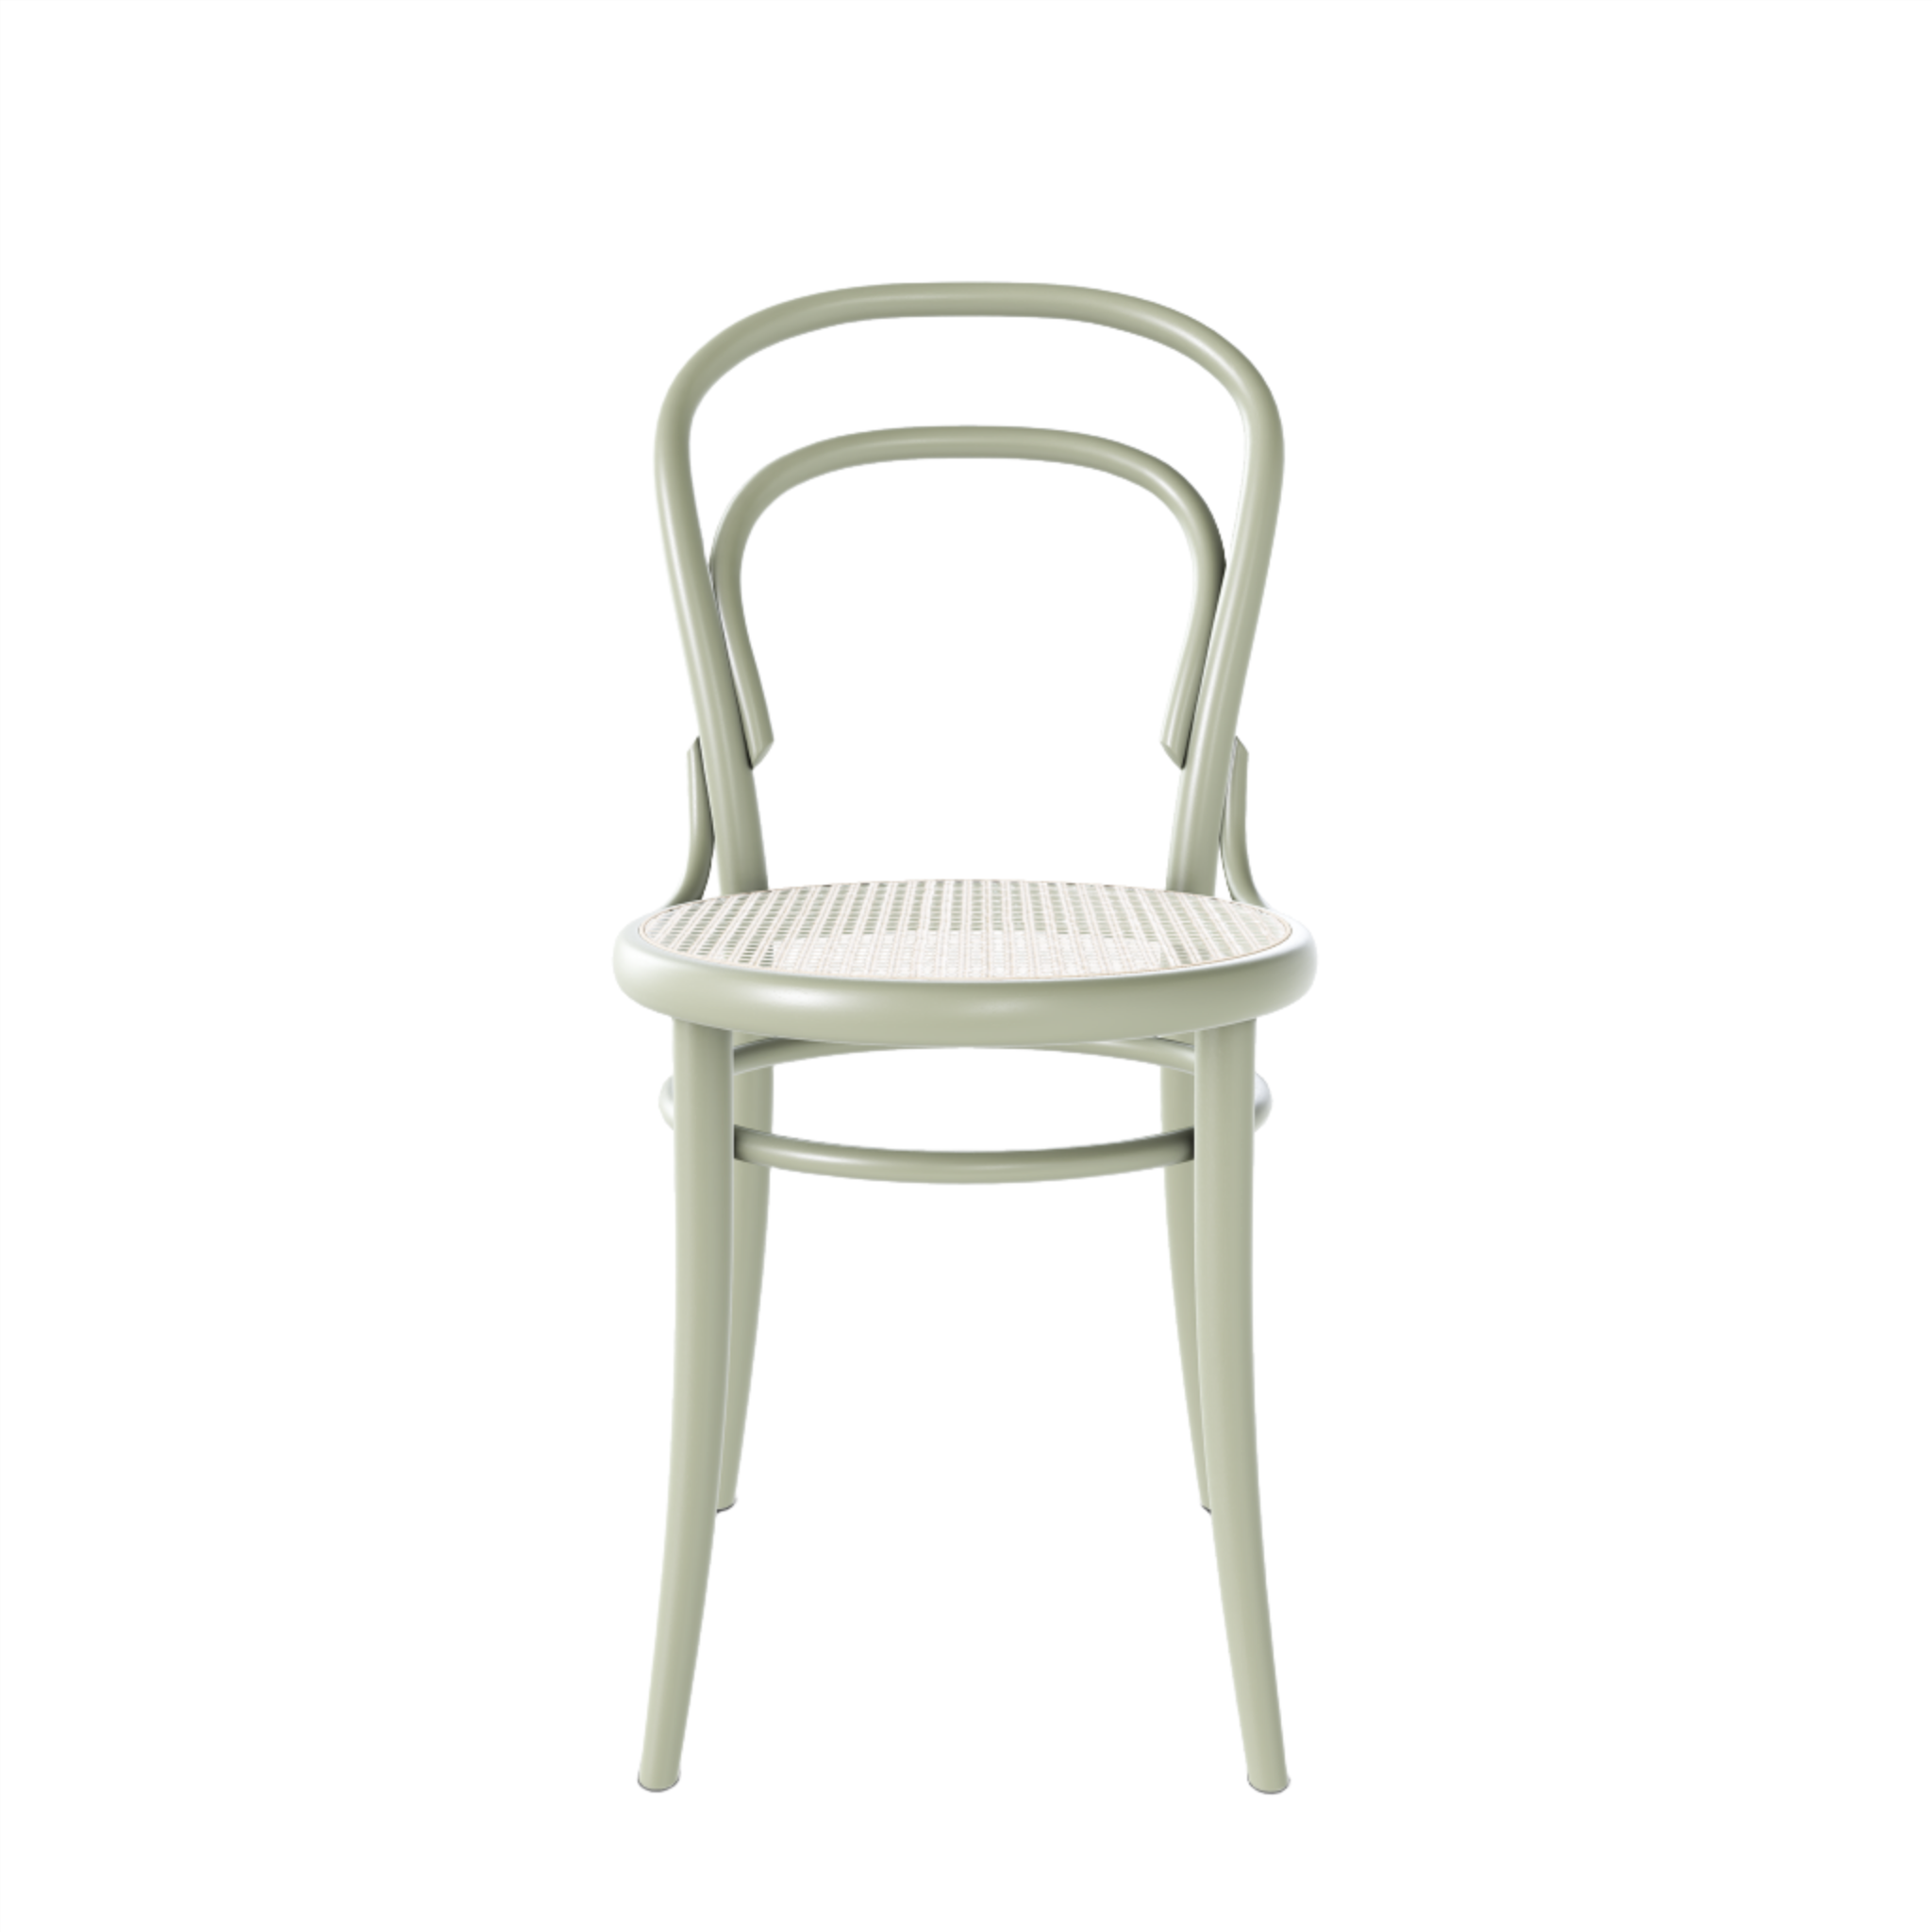 Ton 14 Dining Chair with cane seat in pebble green